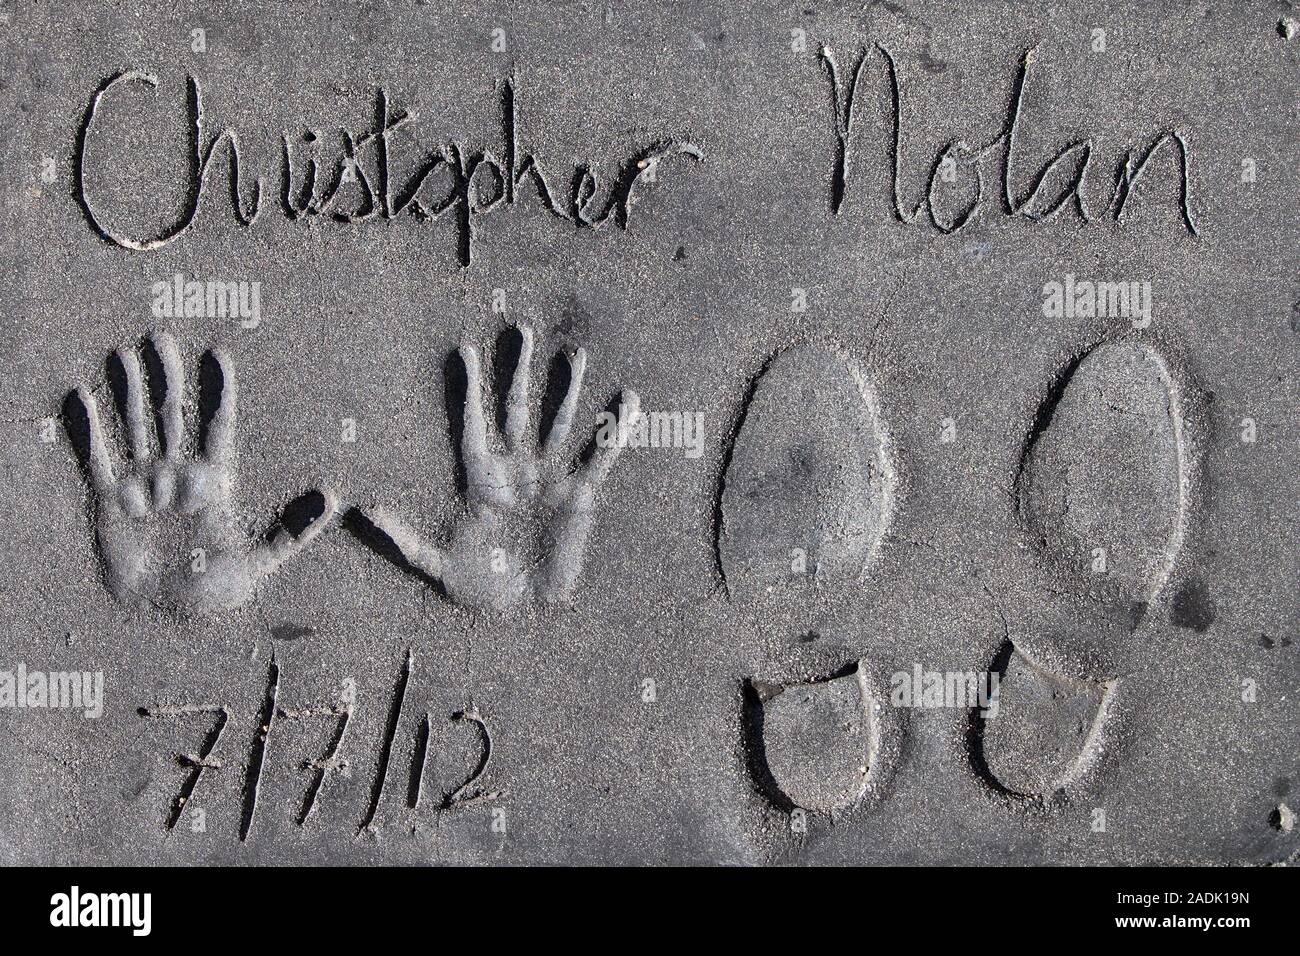 Los Angeles, California - September 06, 2019: Hand and footprints of filmmaker Christopher Nolan in the Grauman's Chinese Theatre forecourt, Hollywood. Stock Photo